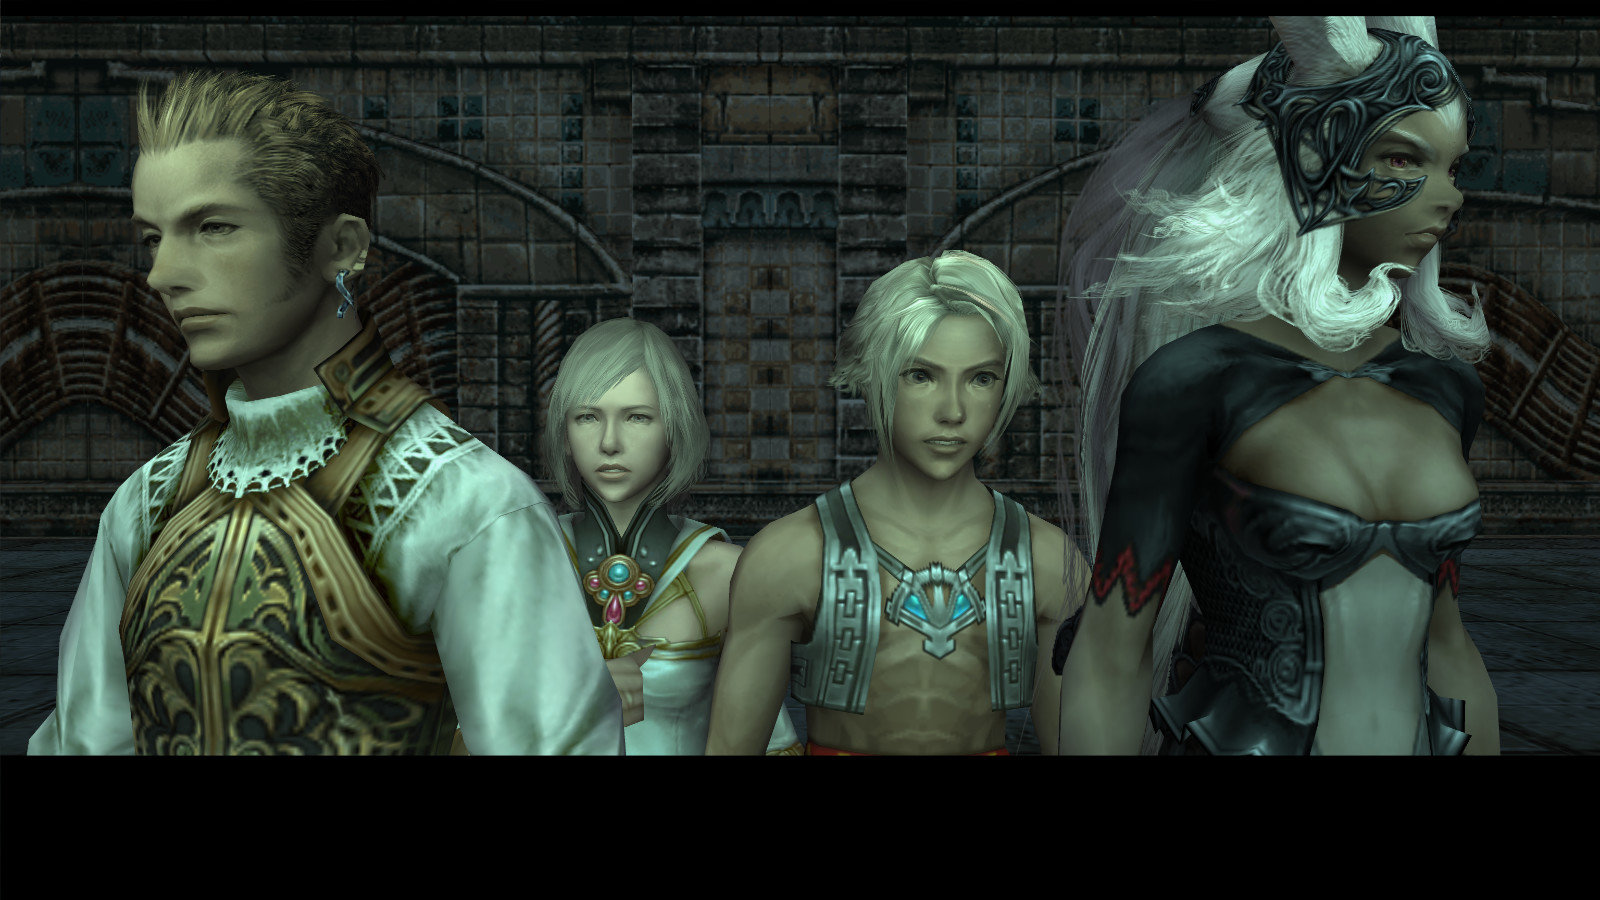 Download Hd 1600x900 Final Fantasy Xii Ff12 Pc Wallpaper Id For Free